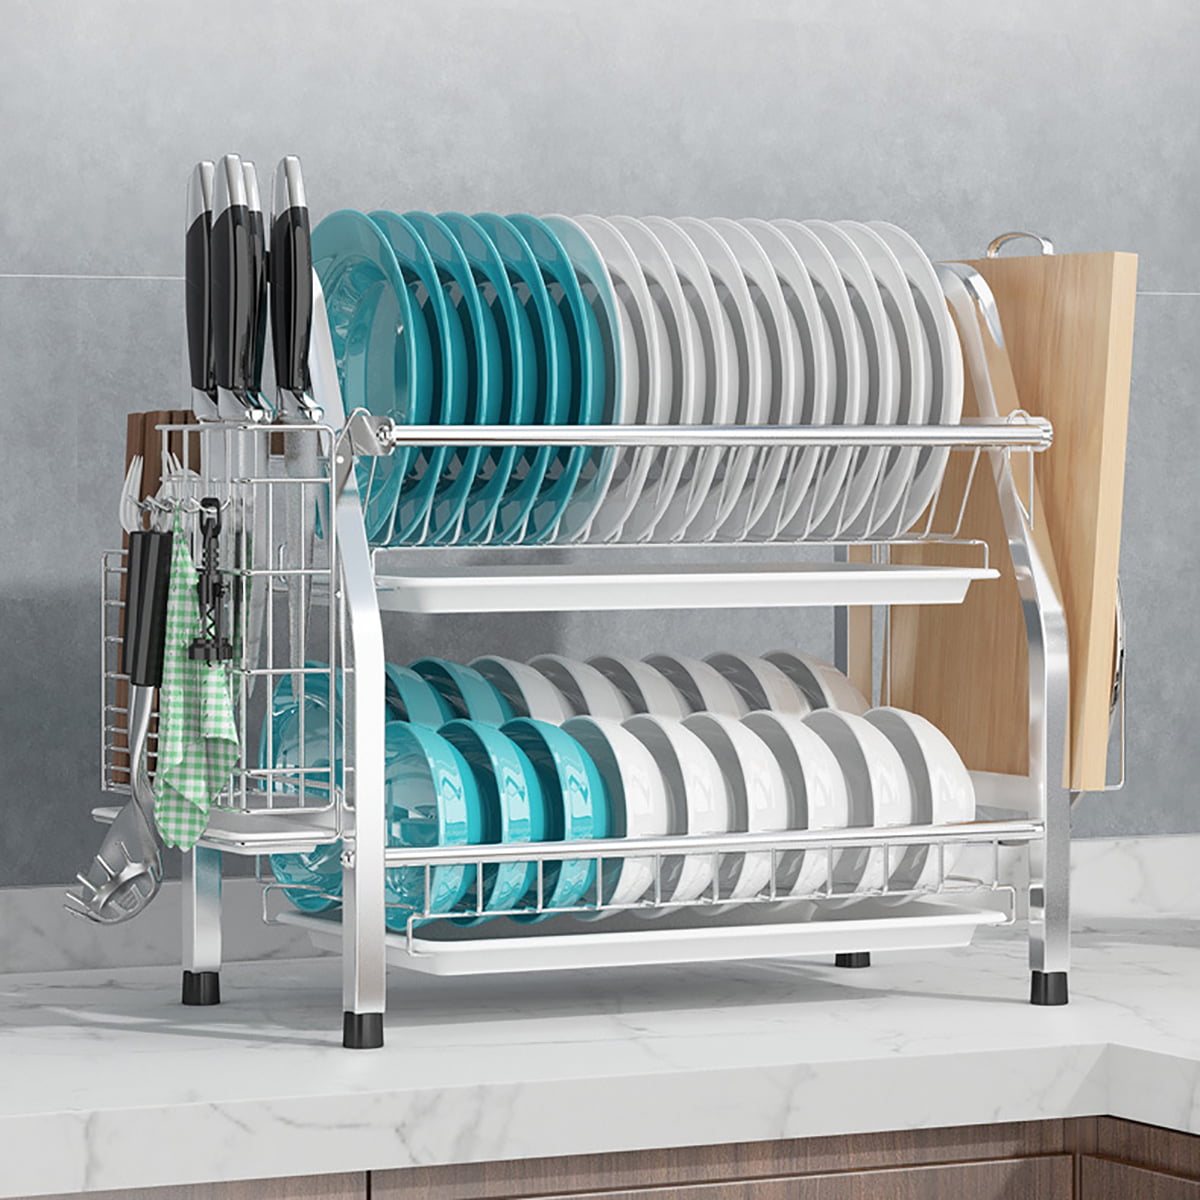 Dish Drying Rack, 304 Stainless Steel 2-Tier Dish Rack with Utensil 304 Stainless Steel Dish Drying Rack